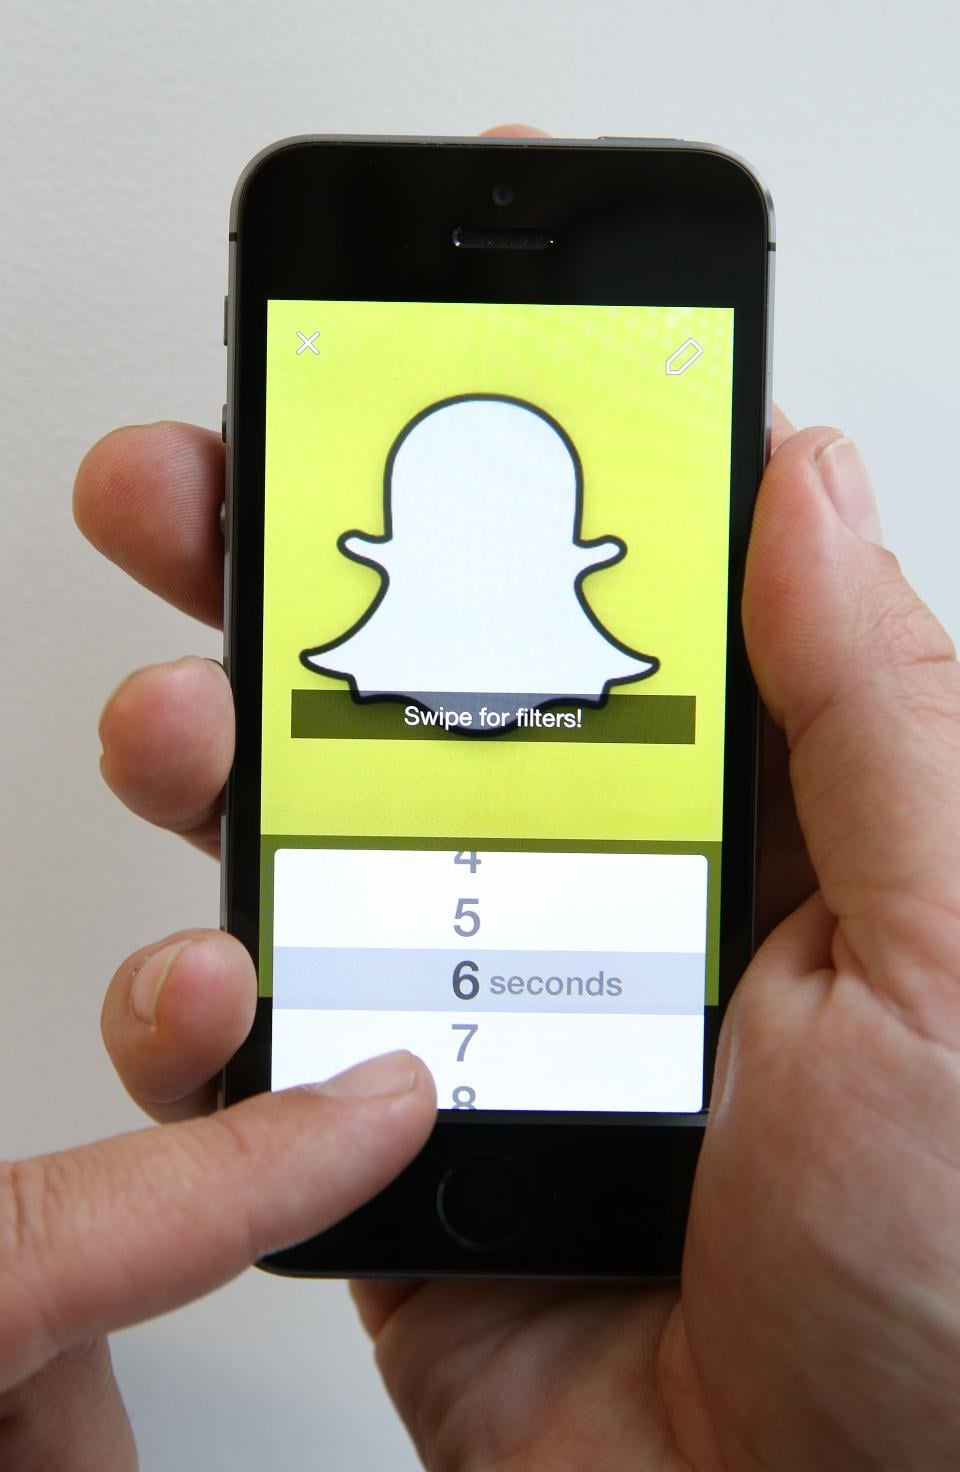 LONDON, ENGLAND – OCTOBER 06: In this photo illustration the Snapchat app is used on an iPhone on October 6, 2014 in London, England. Snapchat allows users’ messages to vanish after seconds. It is being reported that Yahoo may invest millions of dollars in the start up firm. (Photo by Peter Macdiarmid/Getty Images)